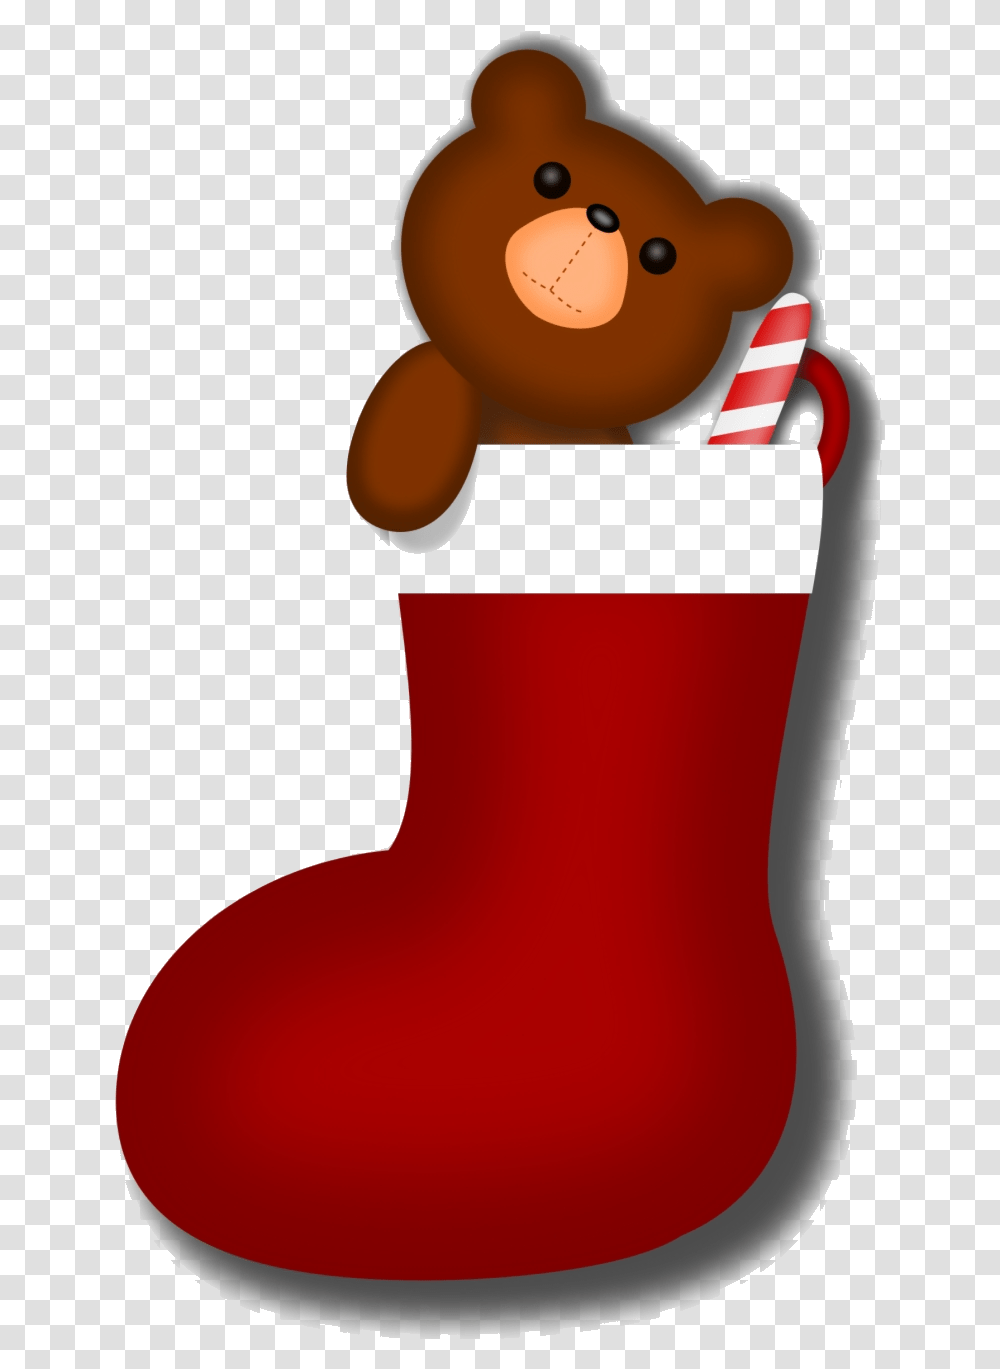 Candy Cane Clipart Christmas Stocking Cute Cartoon Cute Christmas Stocking Clipart, Gift, Birthday Cake, Dessert, Food Transparent Png